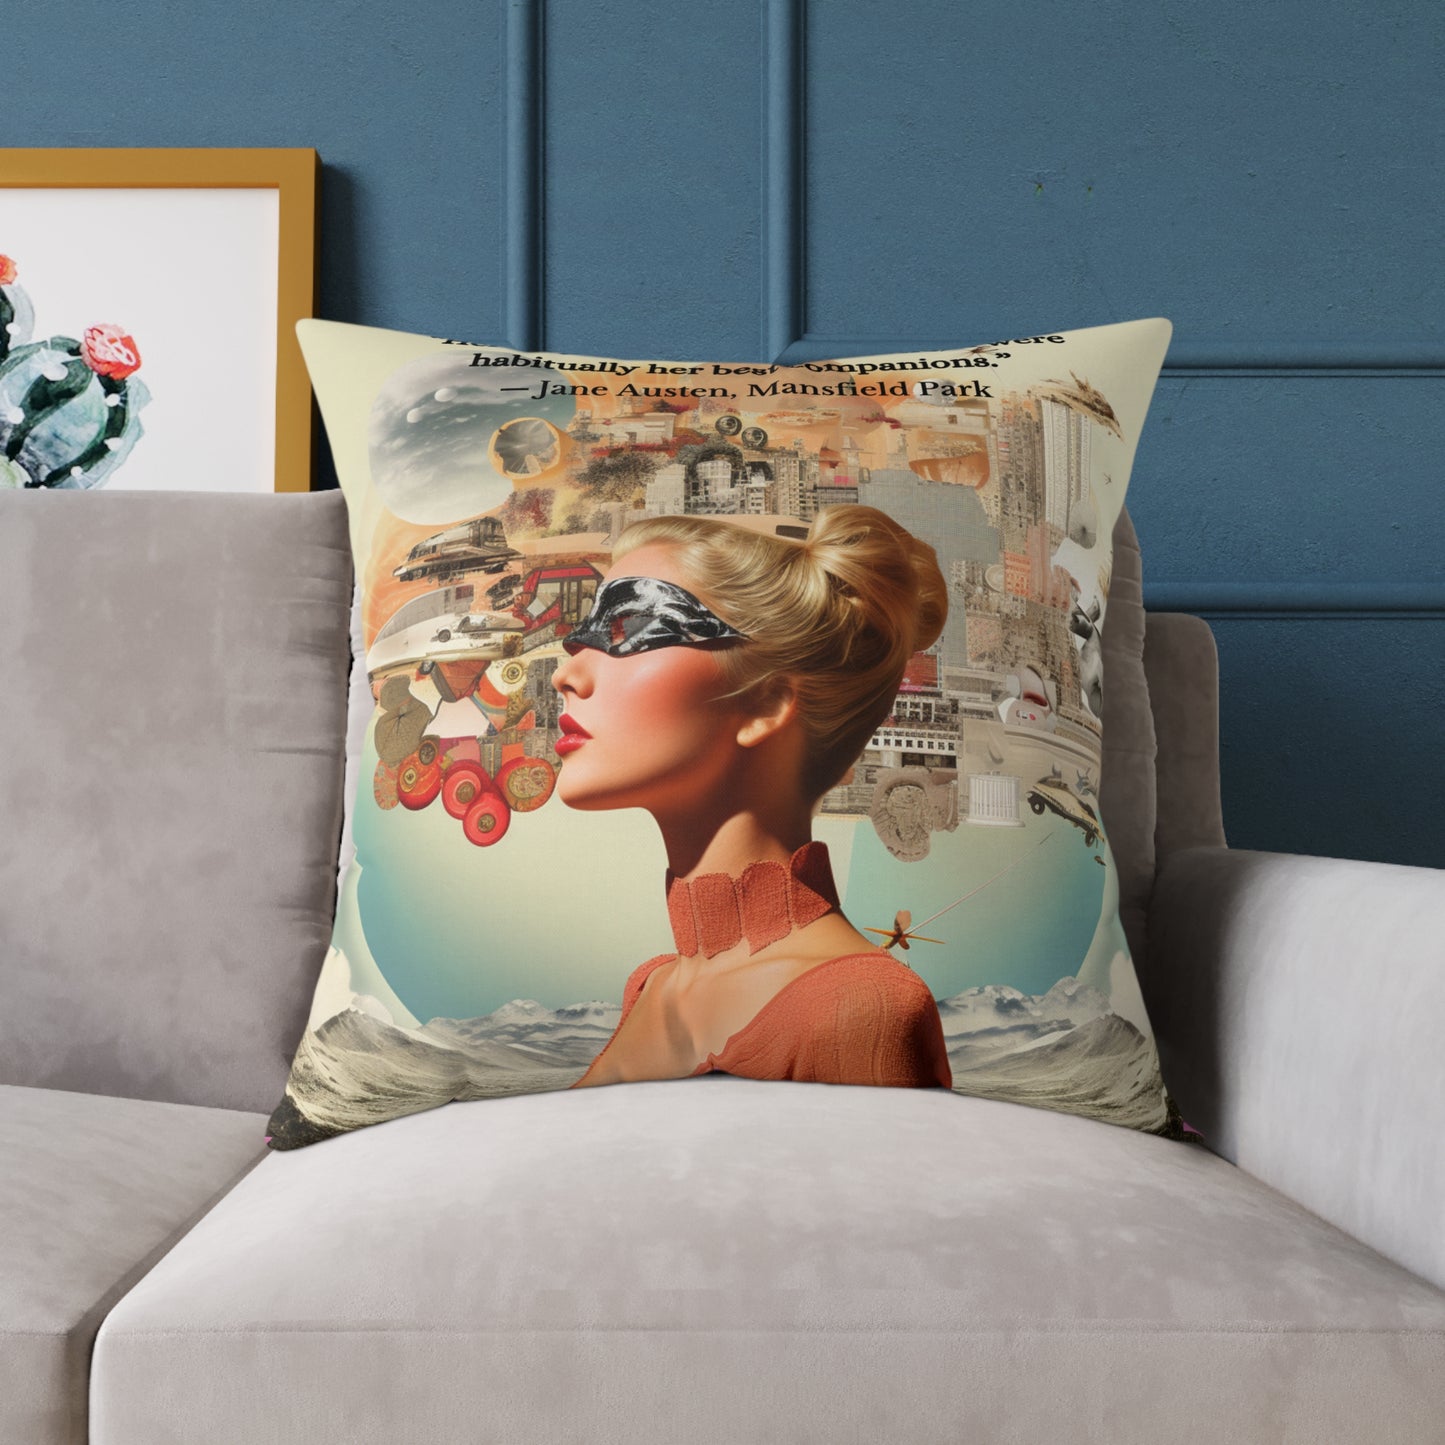 Jane Austen "Her Own Thoughts" Quote Cushion